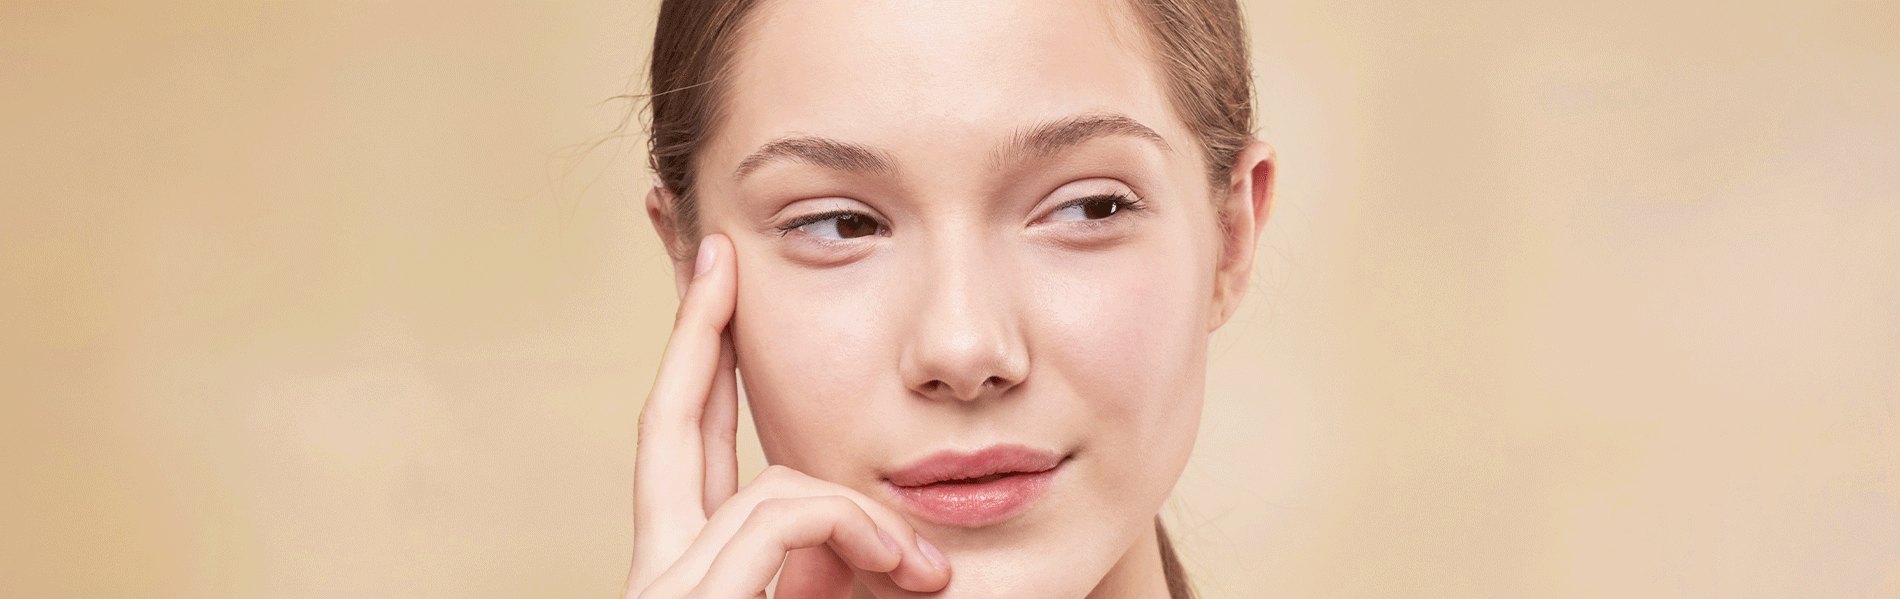 How to Fight Early Signs of Wrinkles?